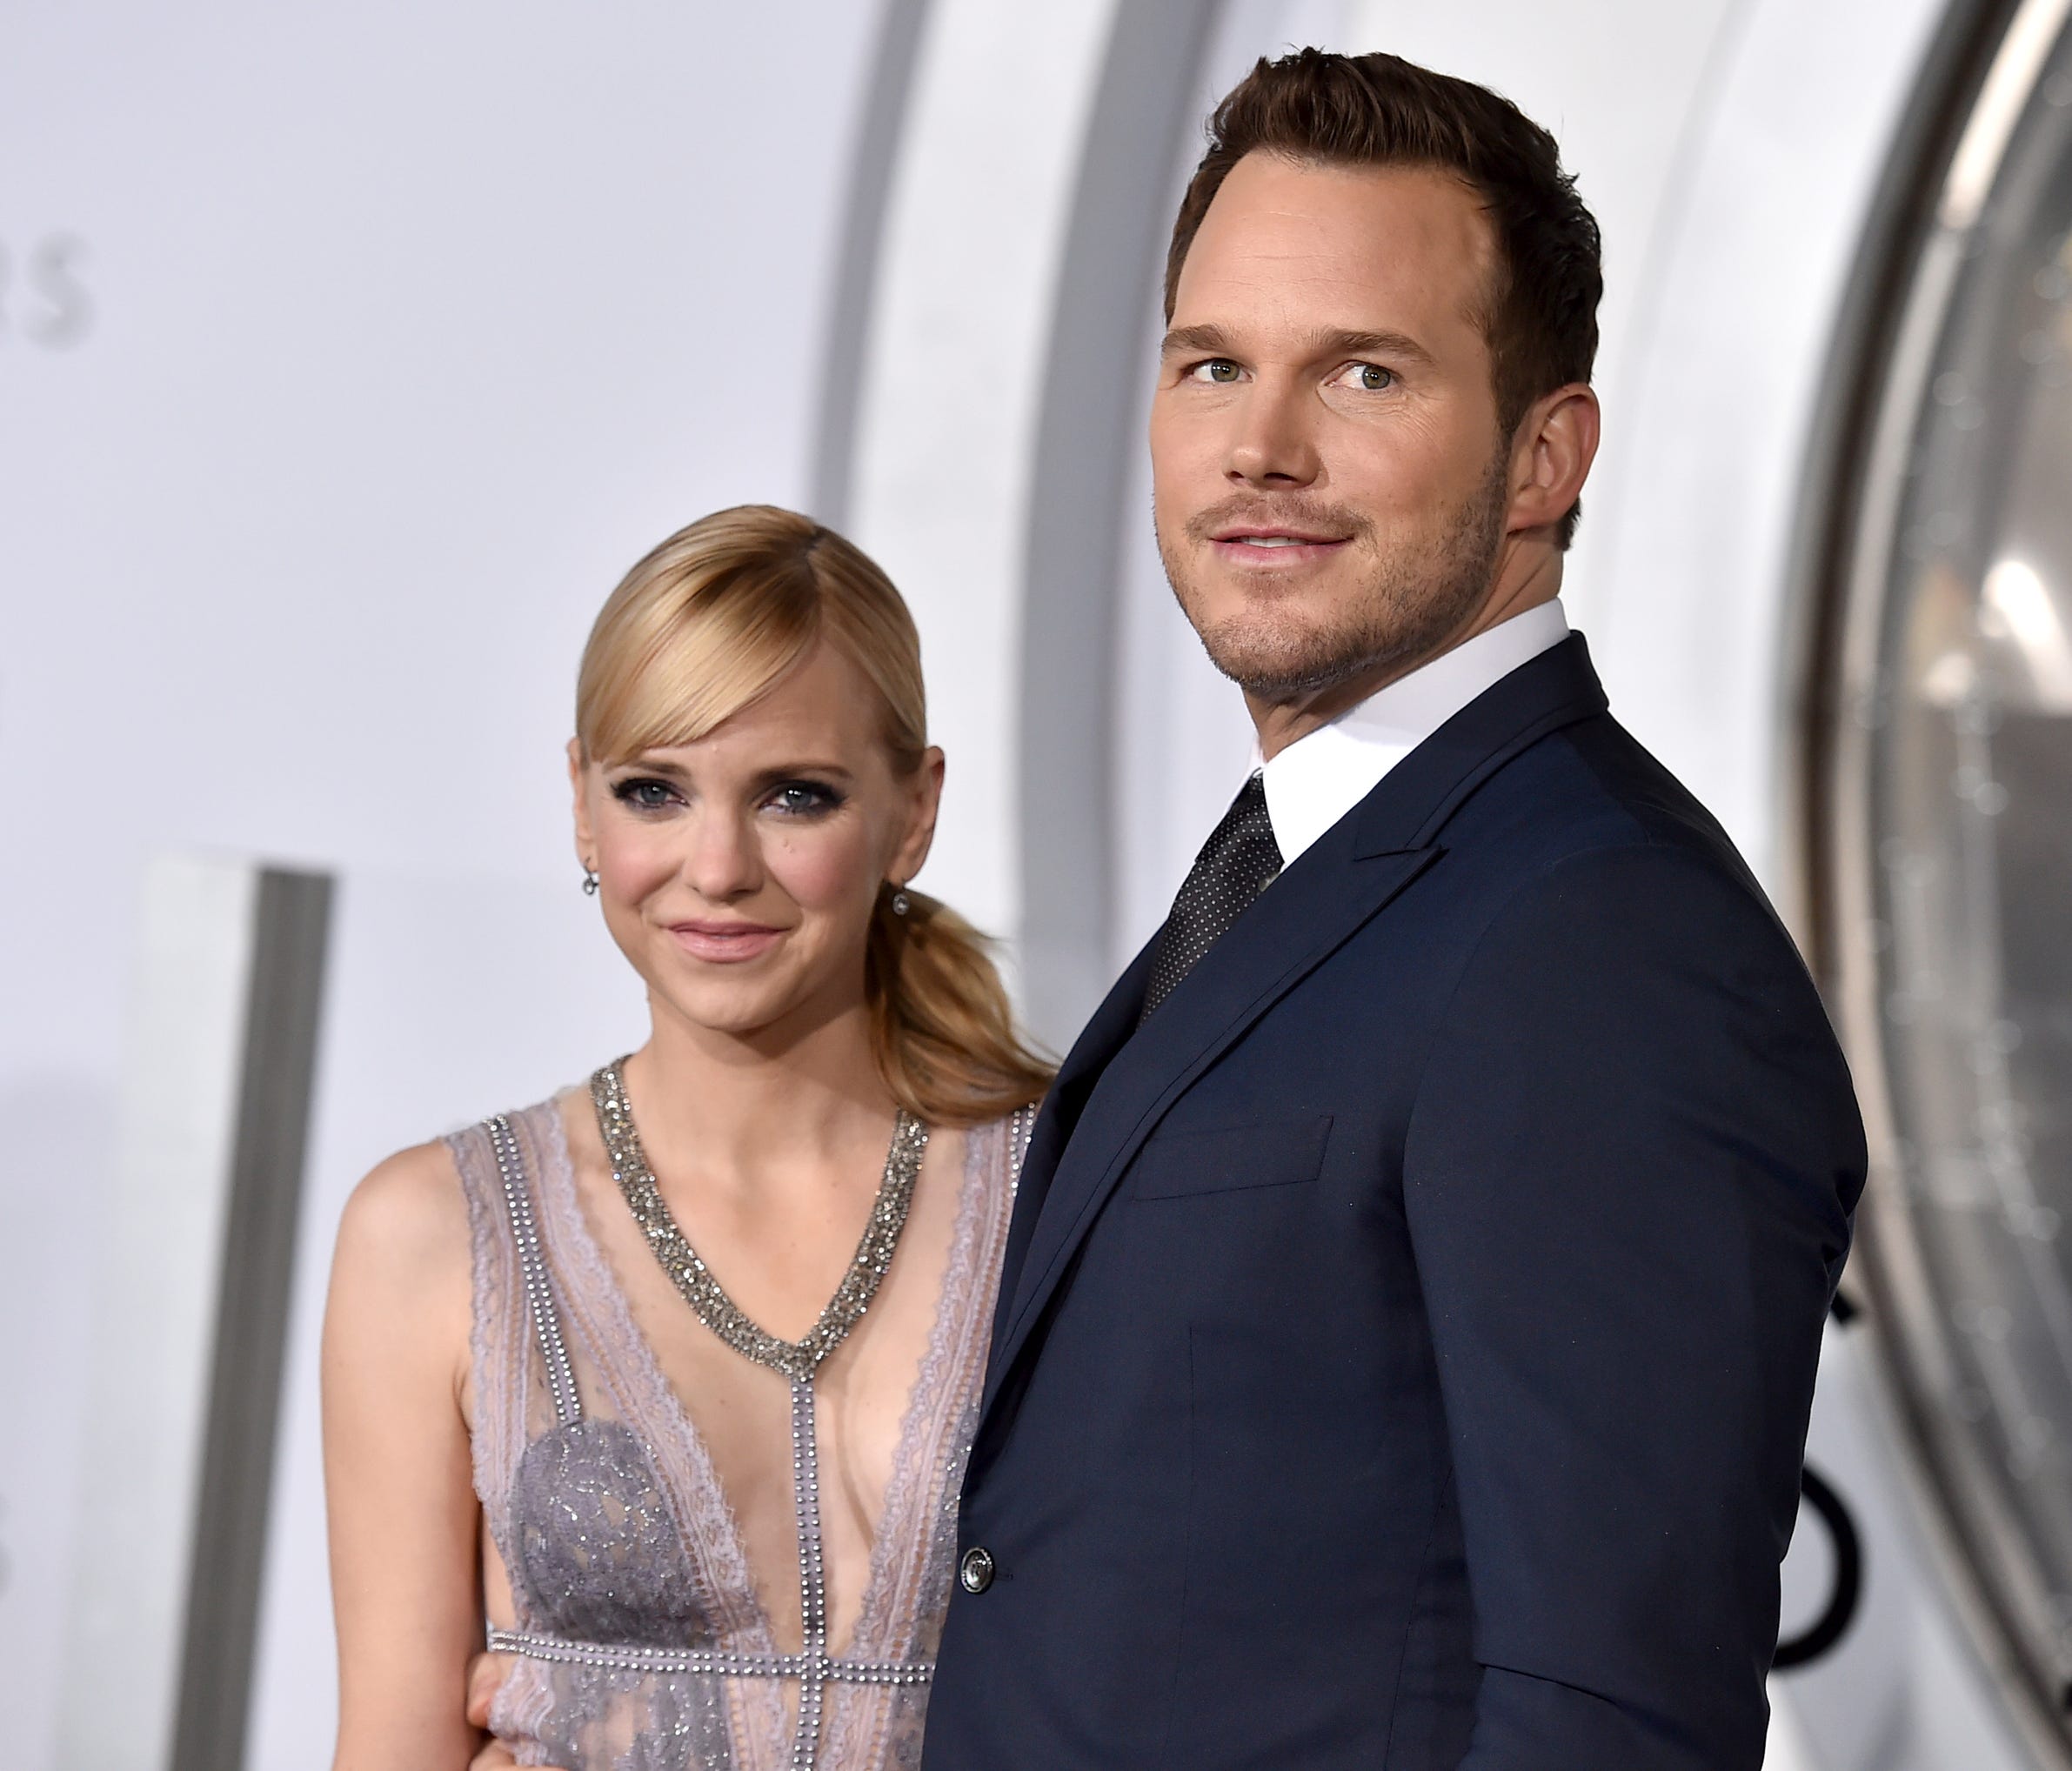 Chris Pratt made his first appearance since announcing his separation with Anna Faris Sunday.